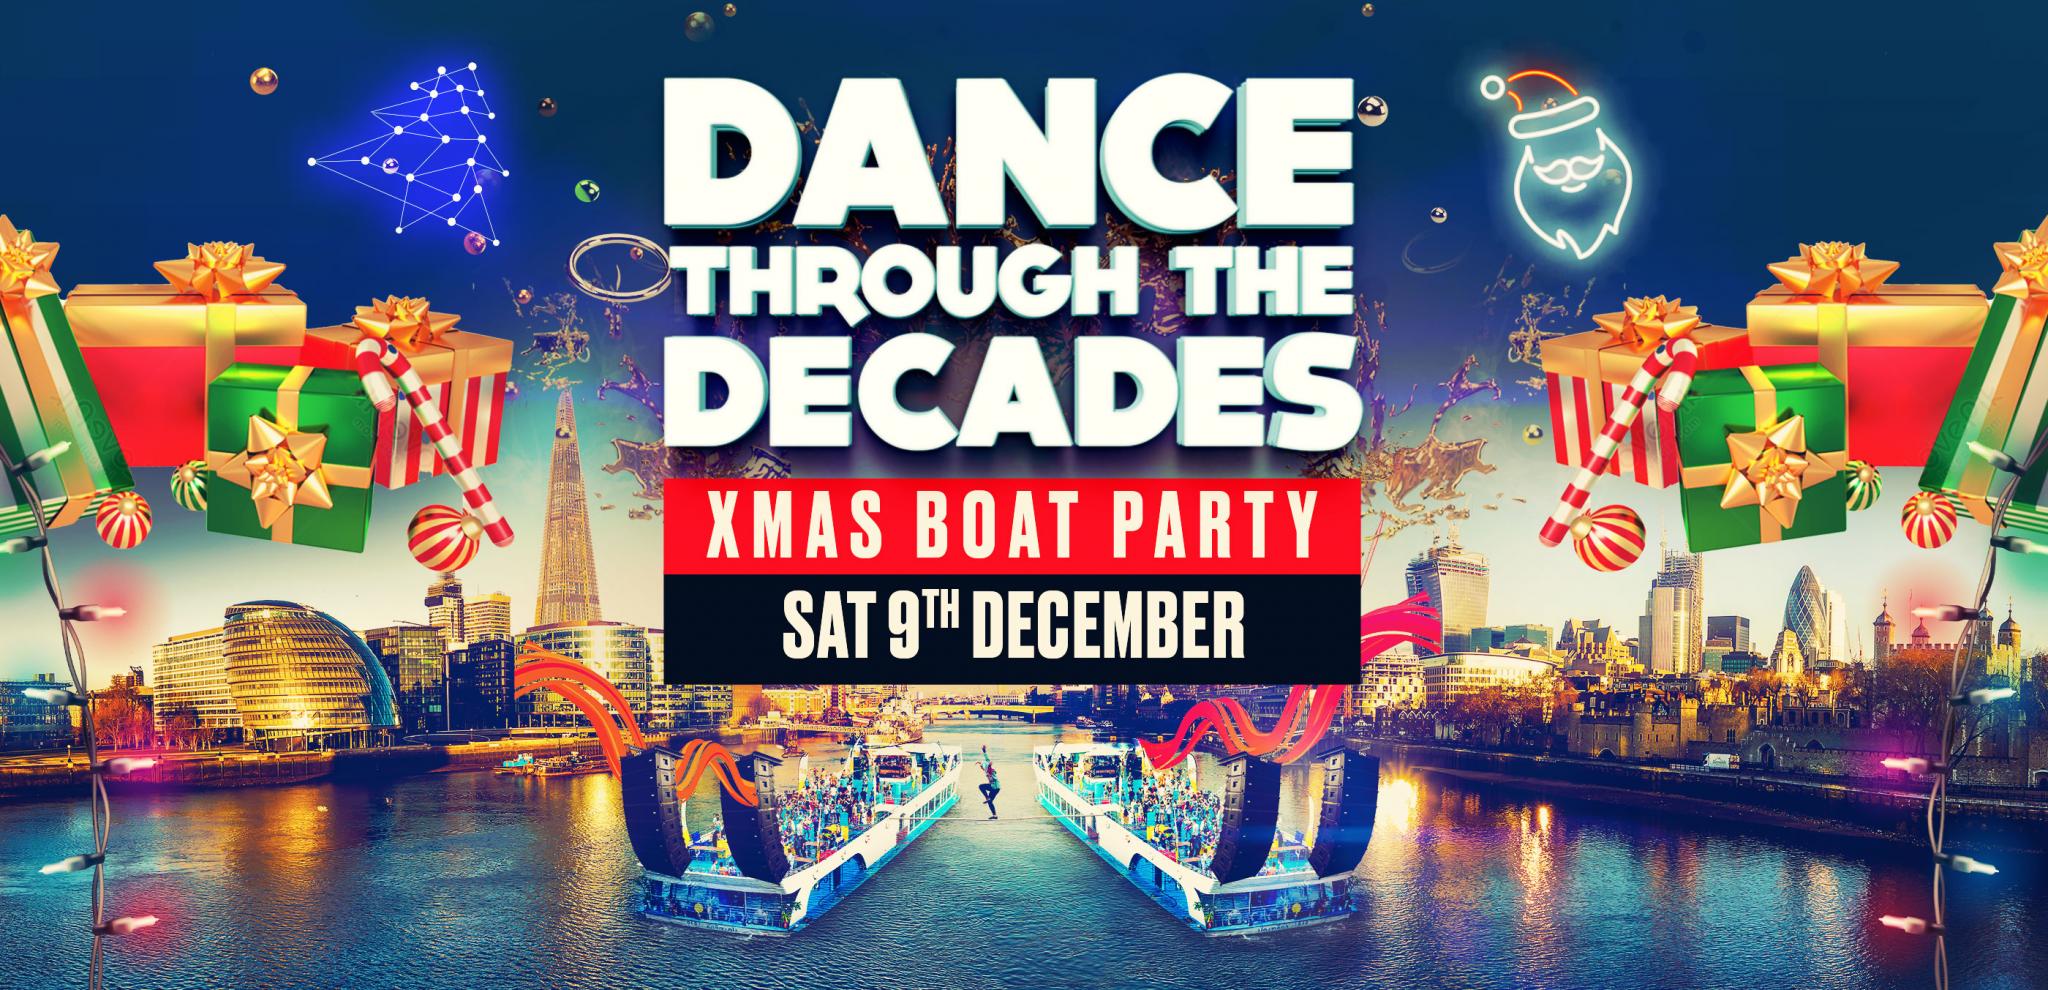 Dance Through The Decades Xmas Boat Party - London